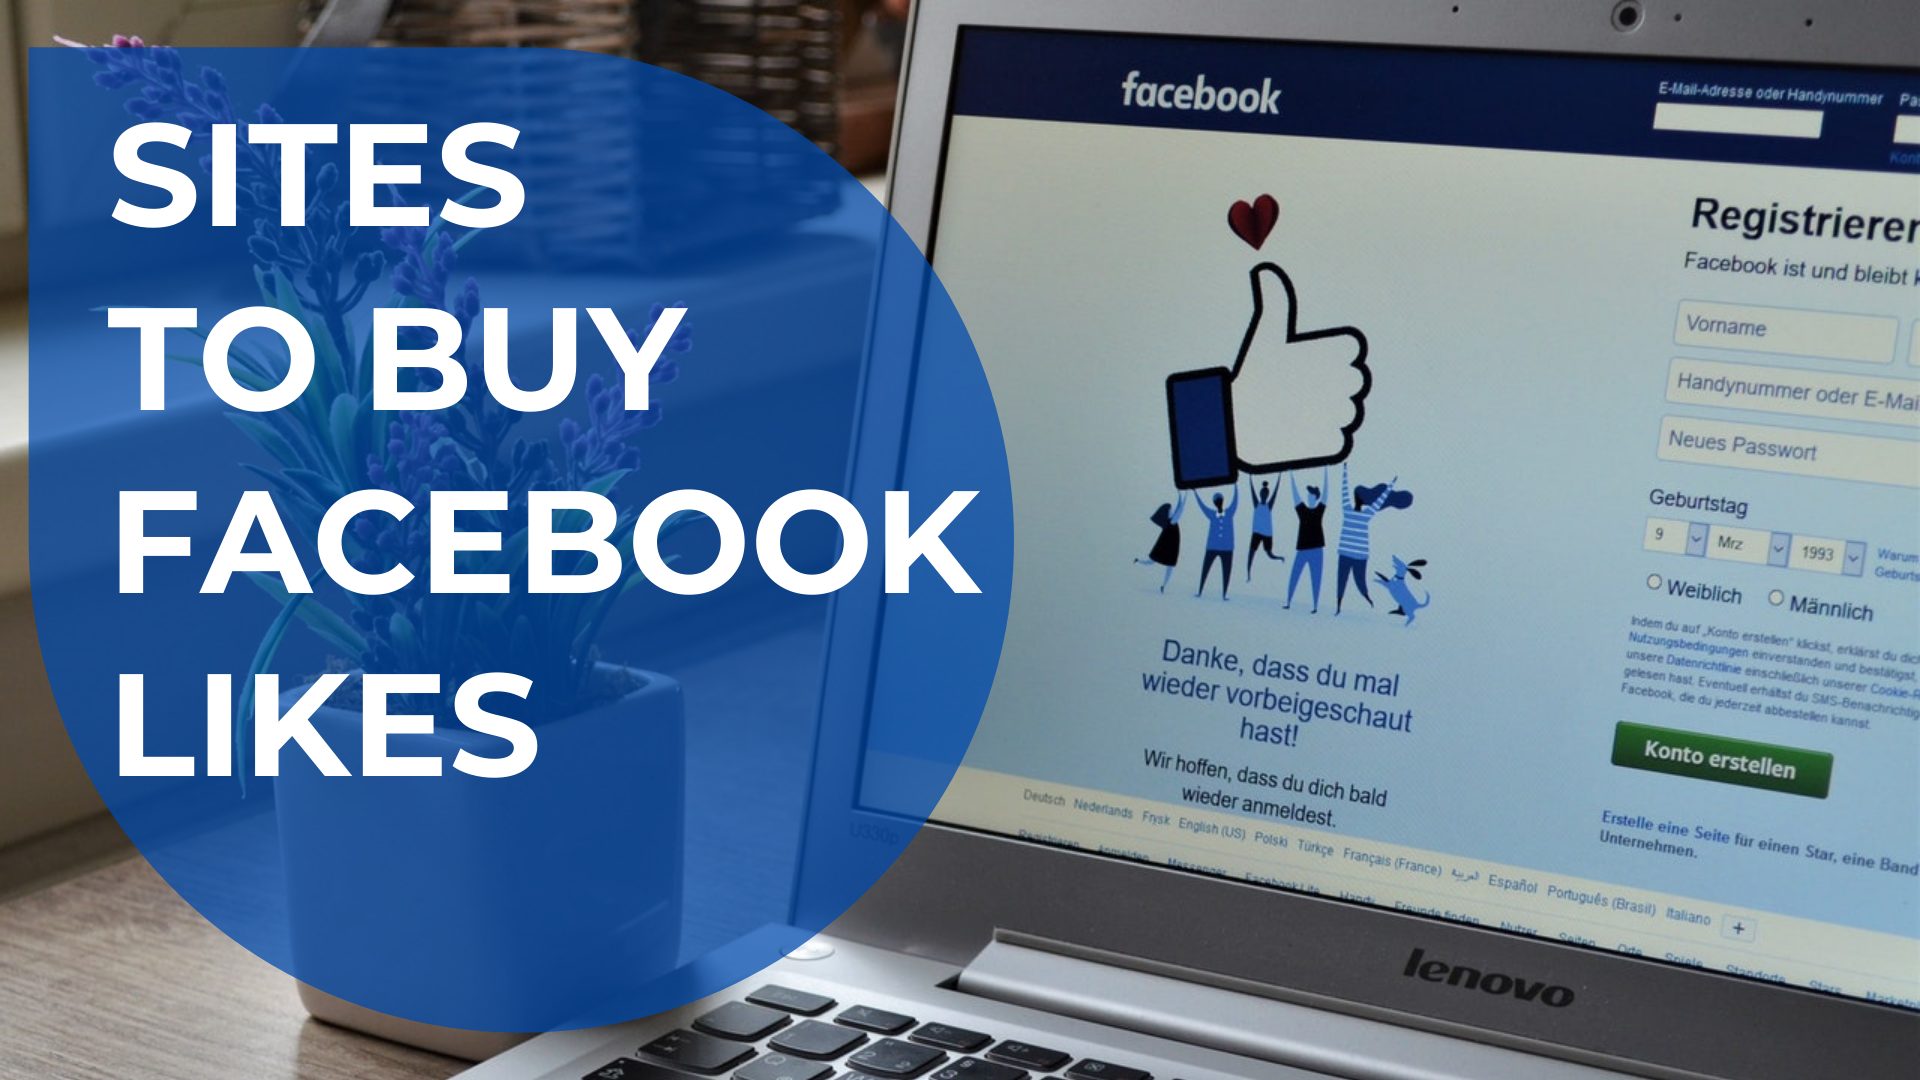 Buy Facebook Likes and Make Your Facebook Page Grow Overnight